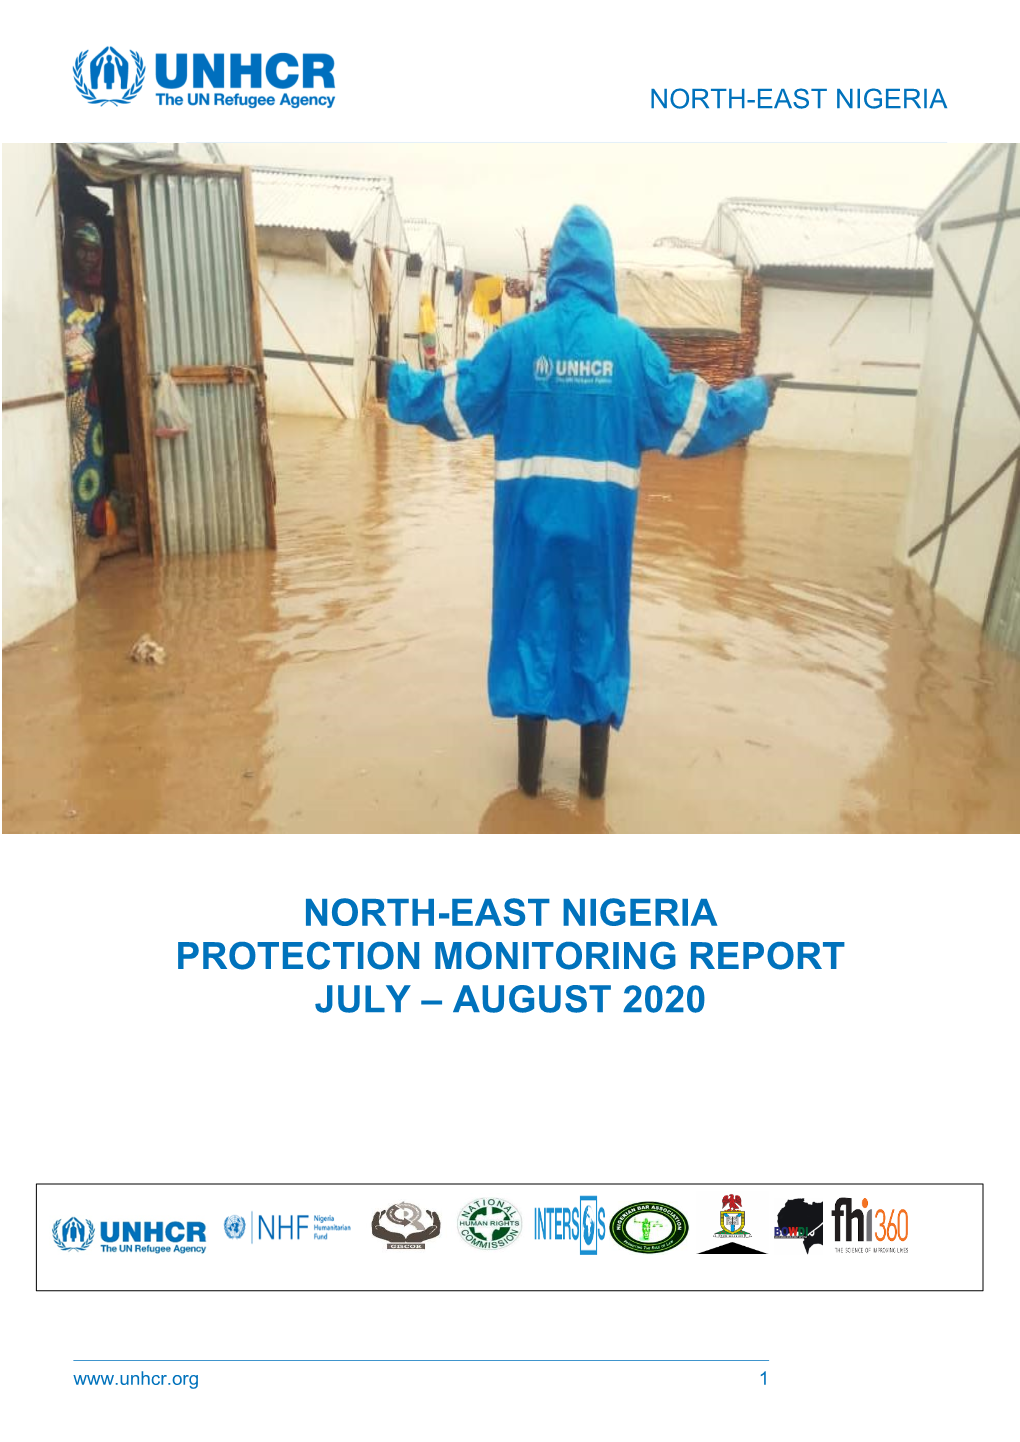 North-East Nigeria Protection Monitoring Report July – August 2020